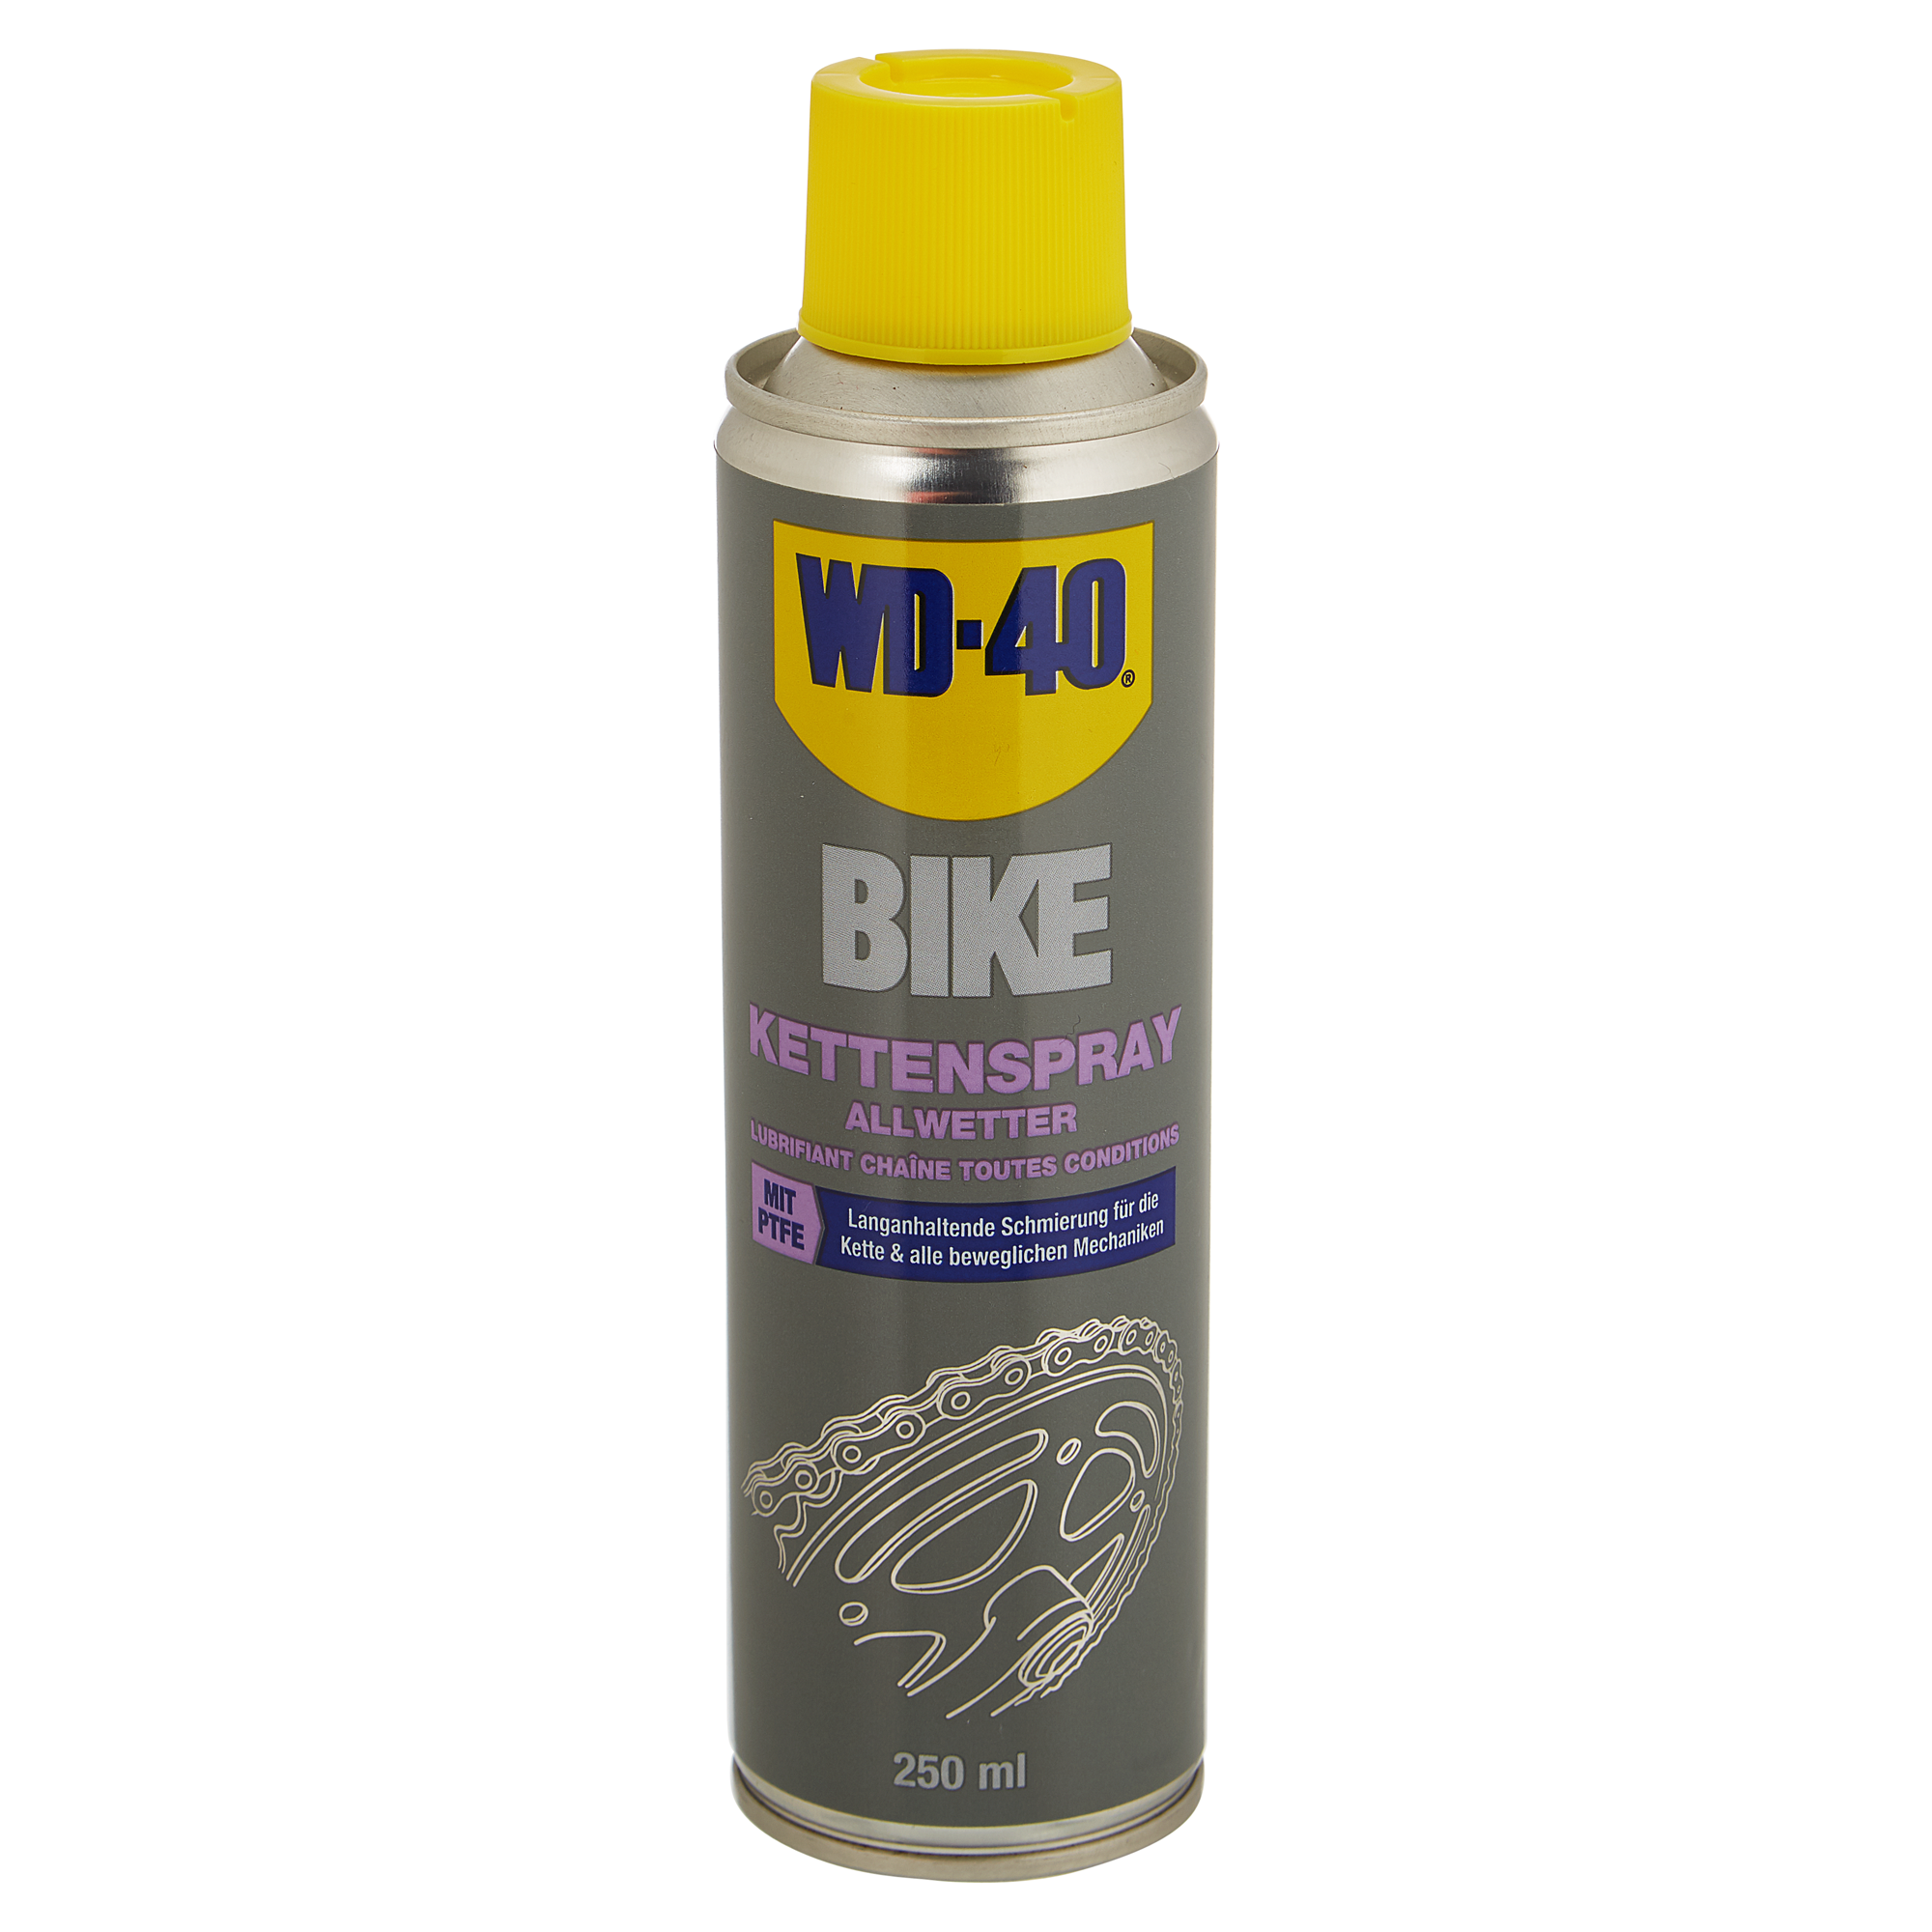 Kettenspray "Bike" Allwetter mit PTFE 250 ml + product picture